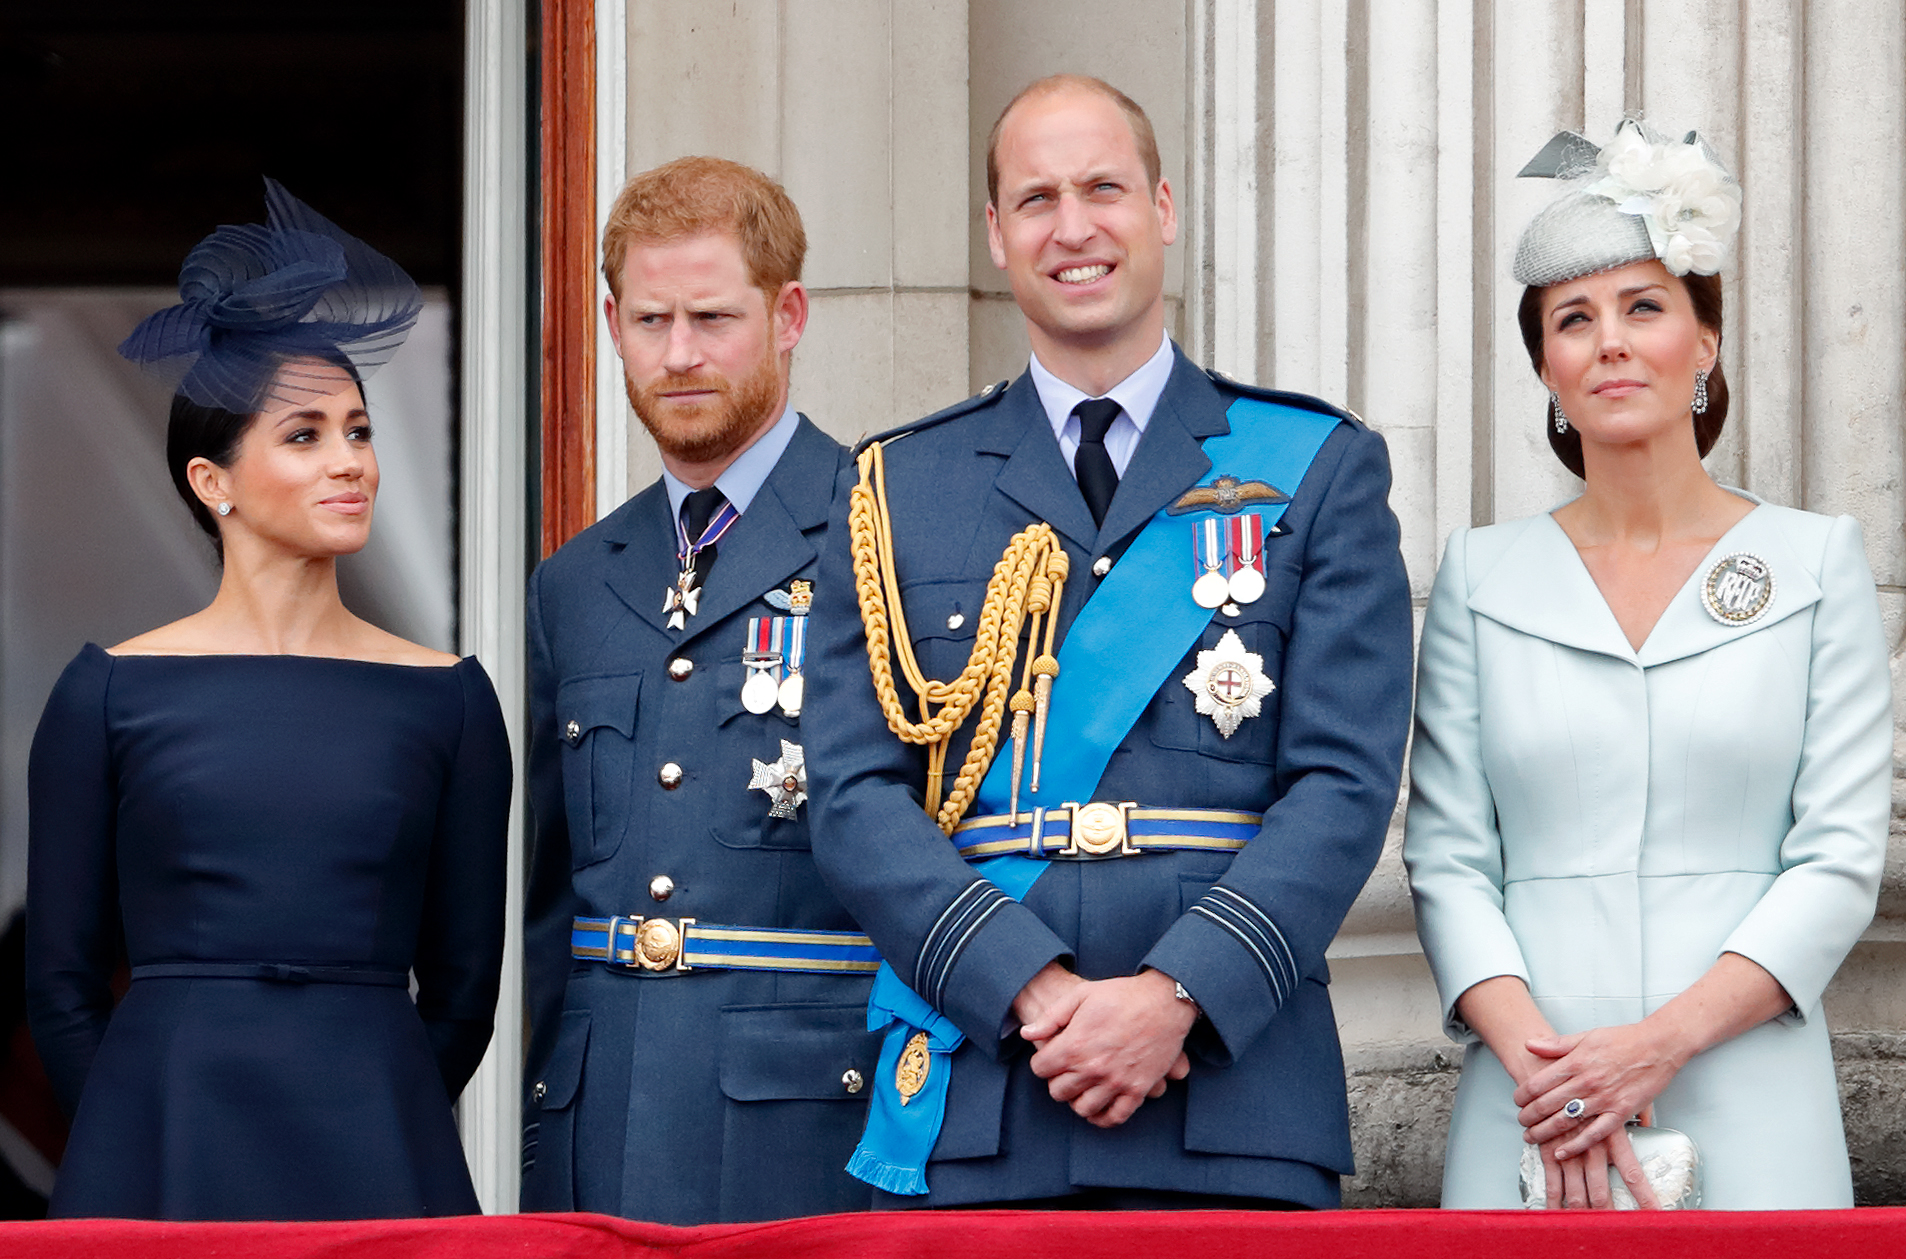 Meghan, Duchess of Sussex, Prince Harry, Duke of Sussex, Prince William, Duke of Cambridge and Catherine, Duchess of Cambridge stand at the balcony of Buckingham Palace on July 10, 2018 in London, England | Source: Getty Images